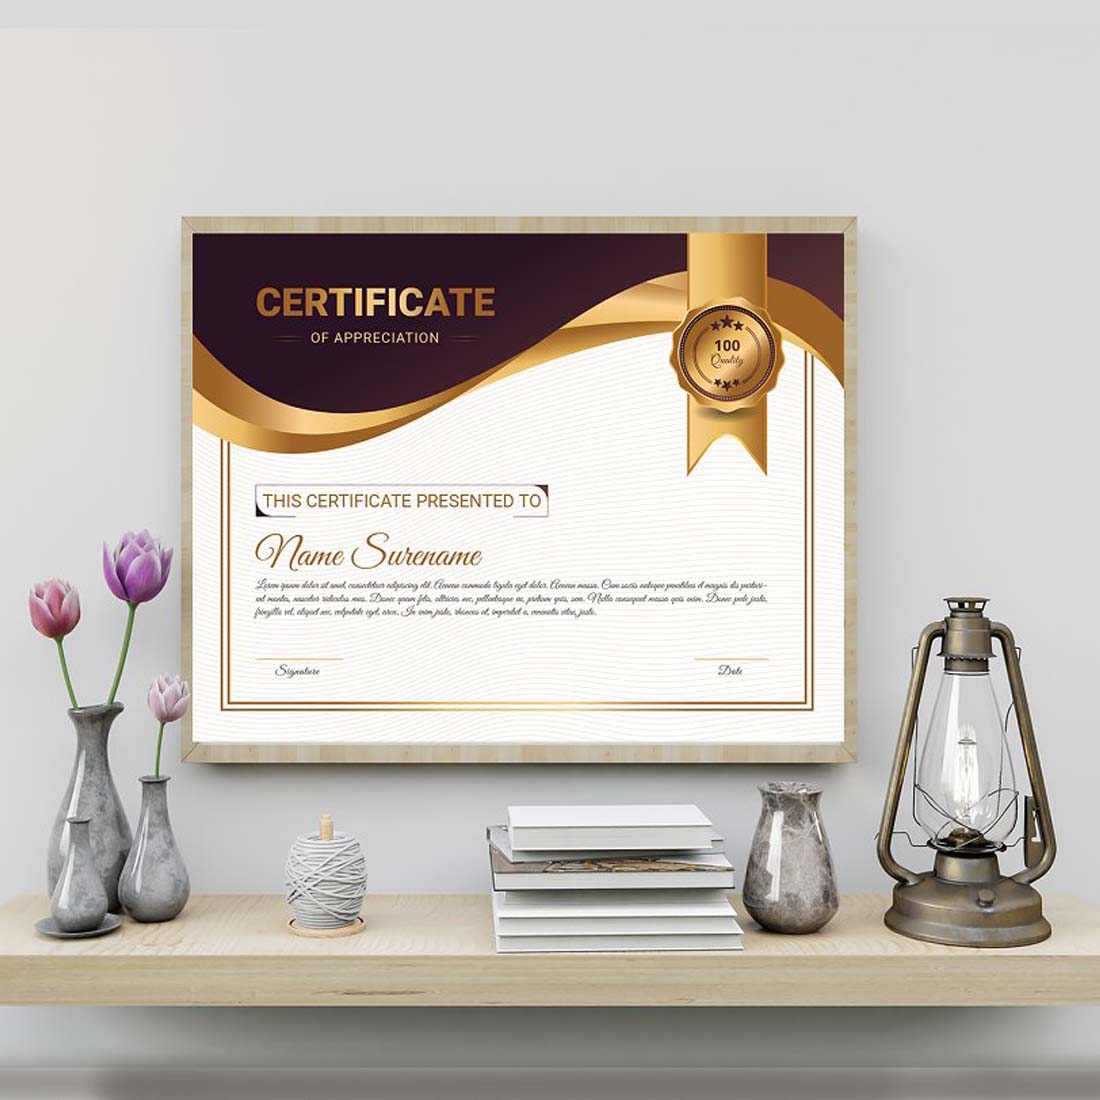 Creative Certificate Design Template preview image.